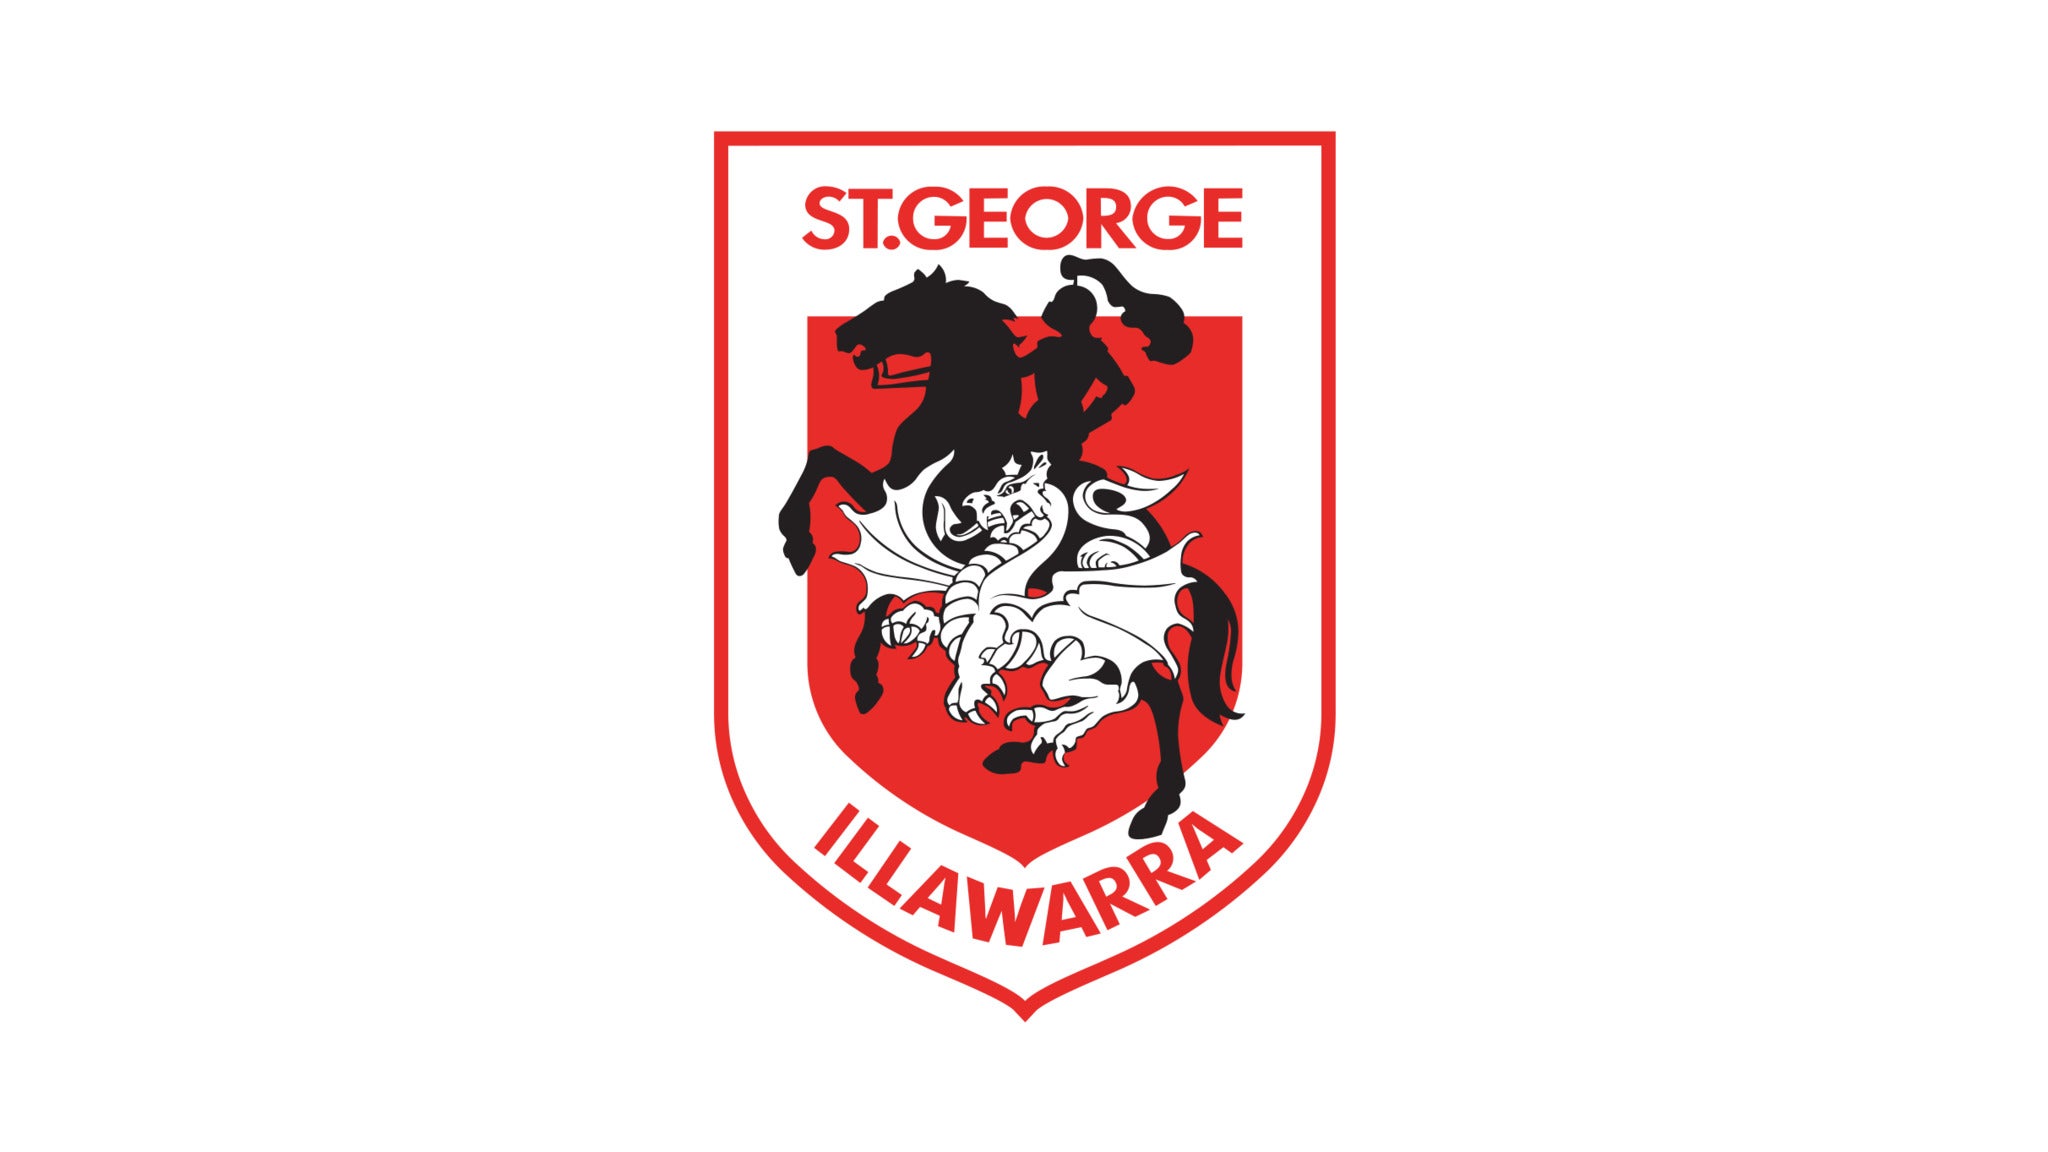 St George Illawarra Dragons v Dolphins in Wollongong promo photo for Red V Members presale offer code